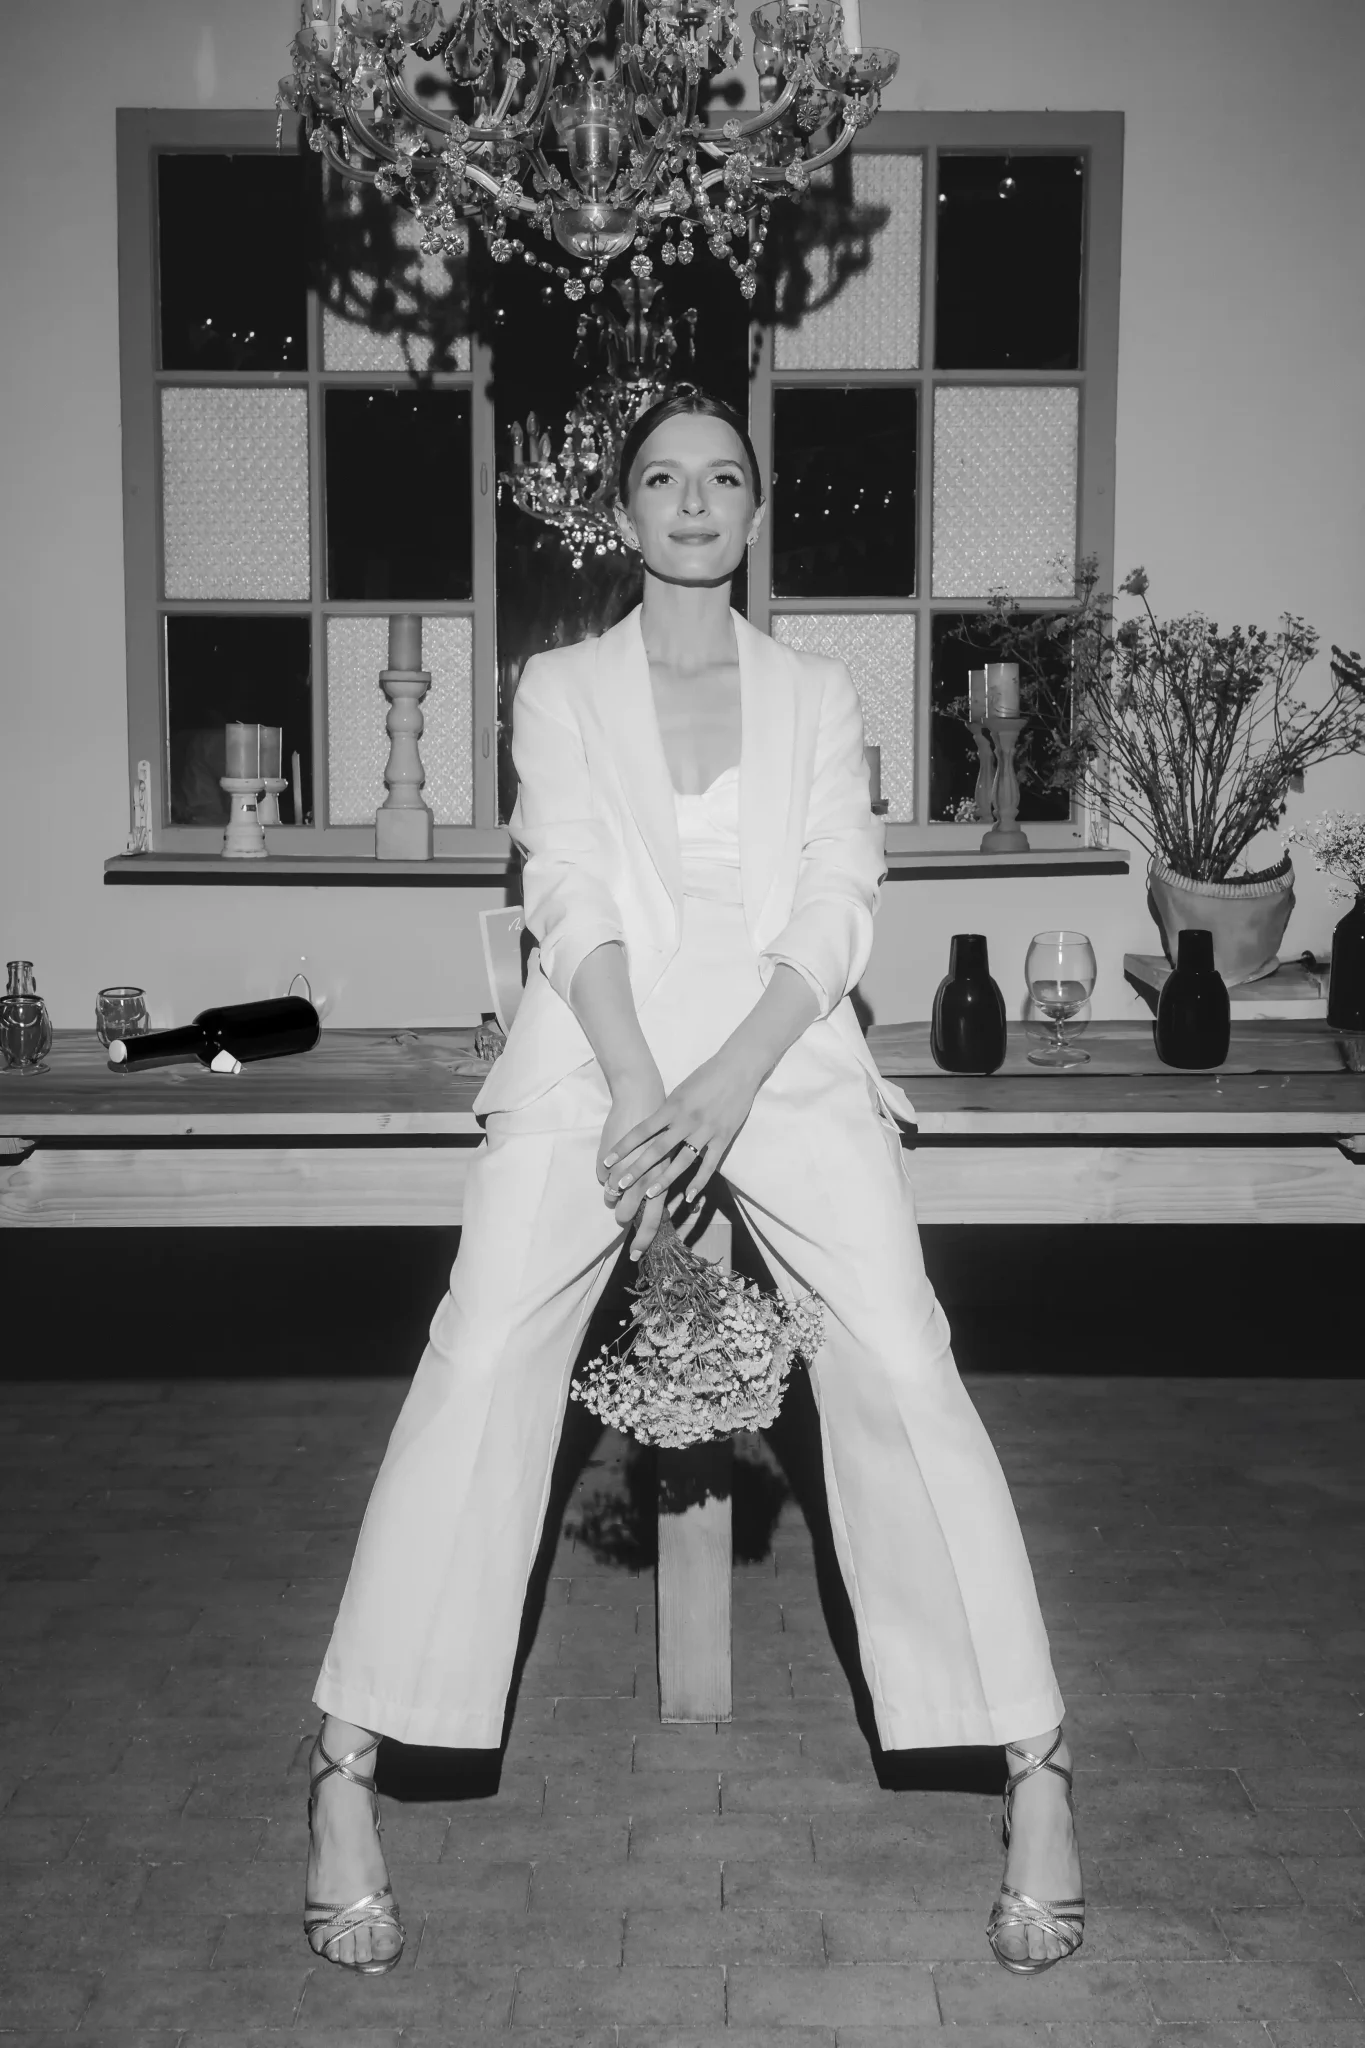 A woman in a white suit sitting on a table.